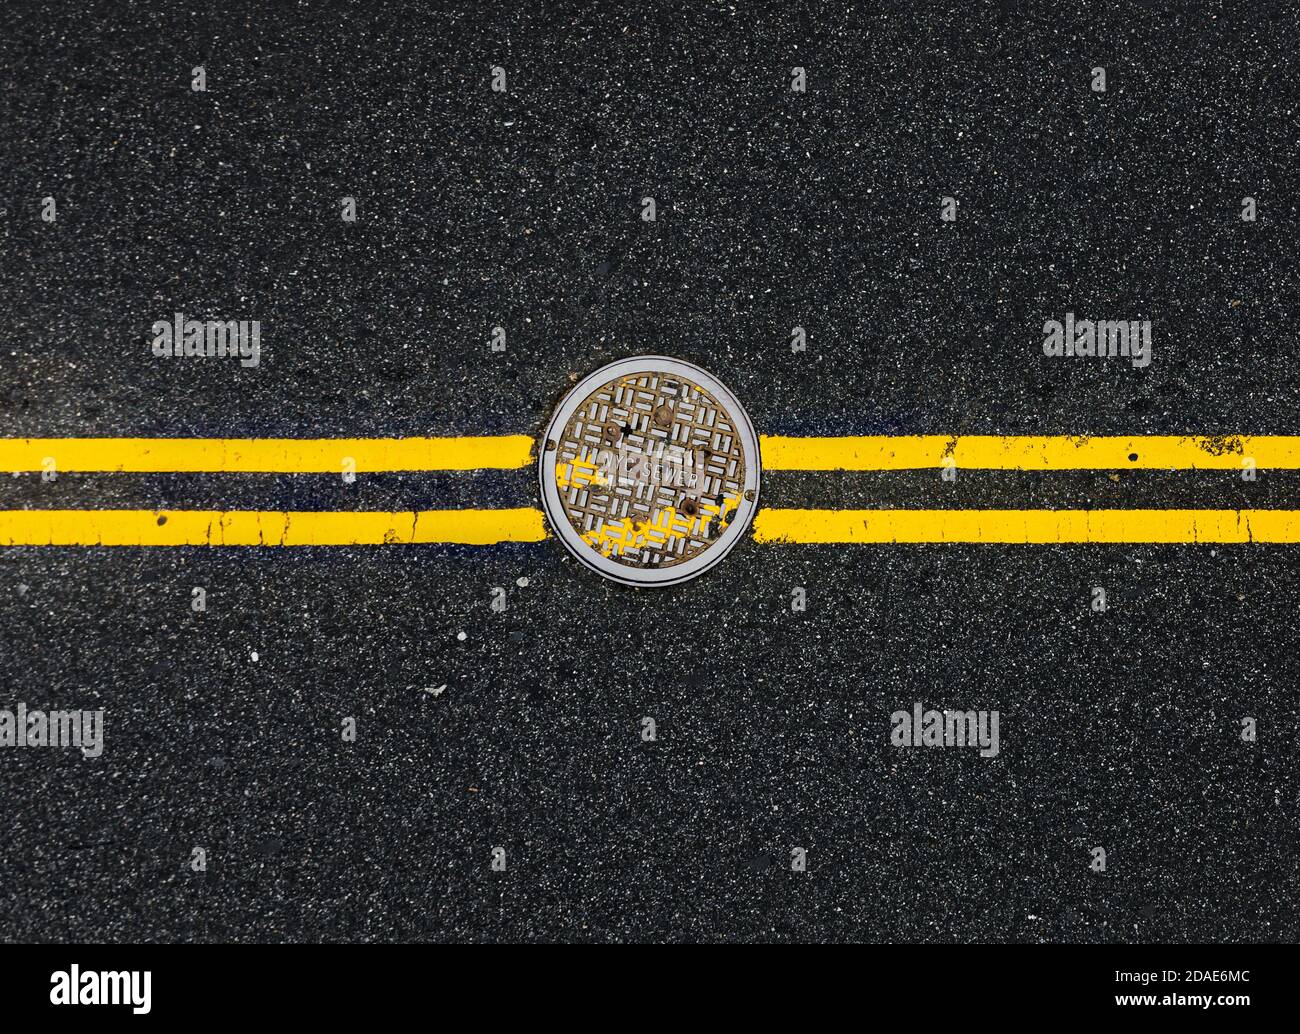 Yellow double solid line with the hatch cover. Road markings on asphalt on the street of Manhattan in New York City. Words NYC sewer on the hatch cove Stock Photo